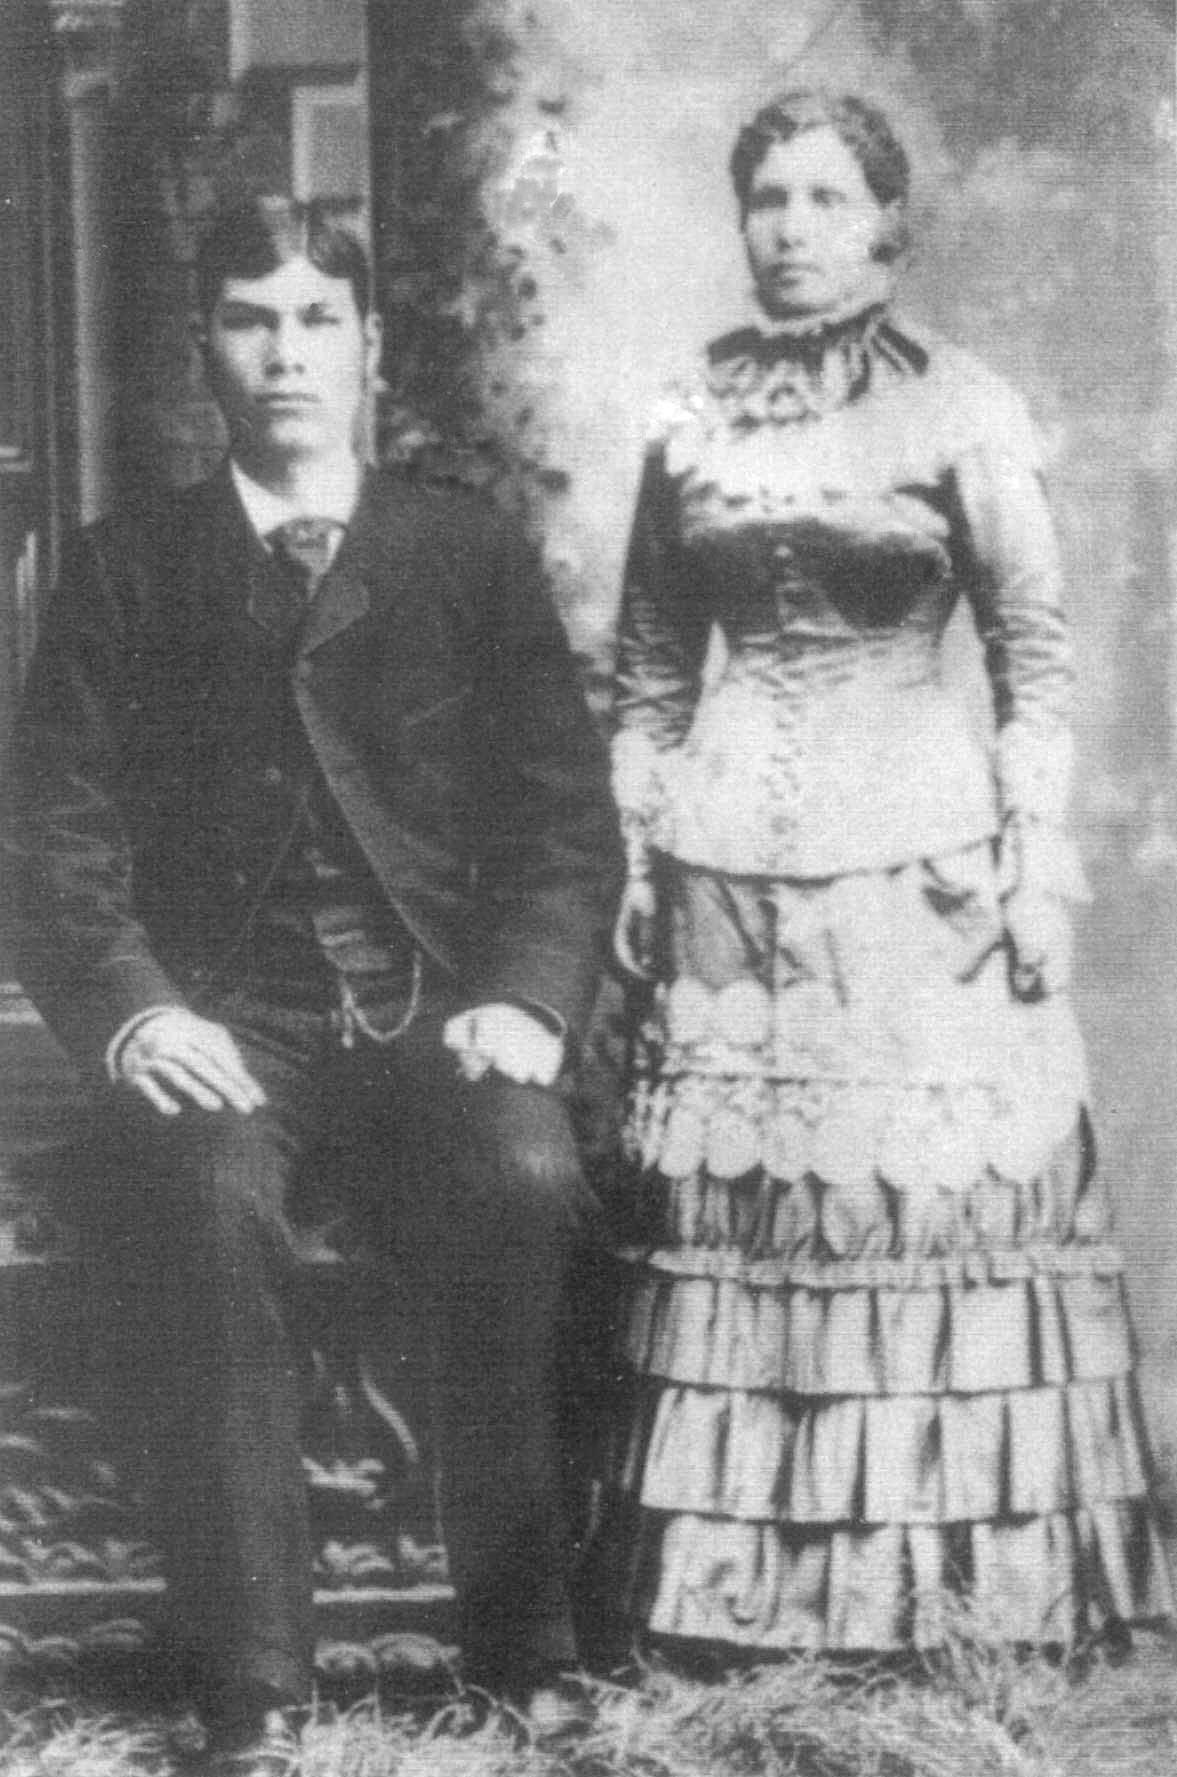 Francis Adora Brown and his wife, Emily Ann Weaver Brown, c. 1881